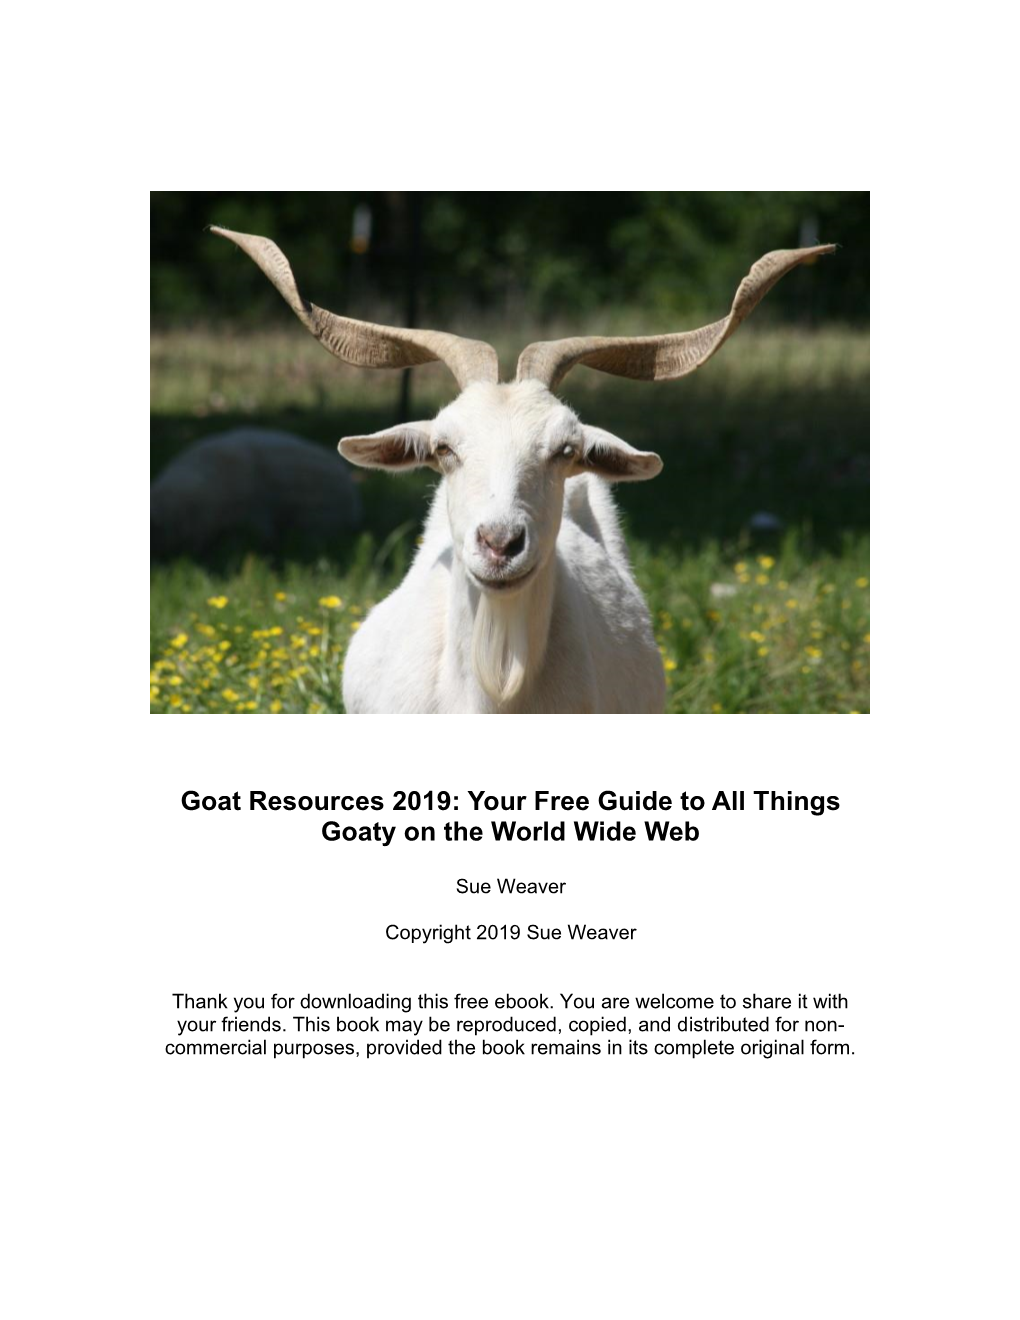 Goat Resources 2019: Your Free Guide to All Things Goaty on the World Wide Web